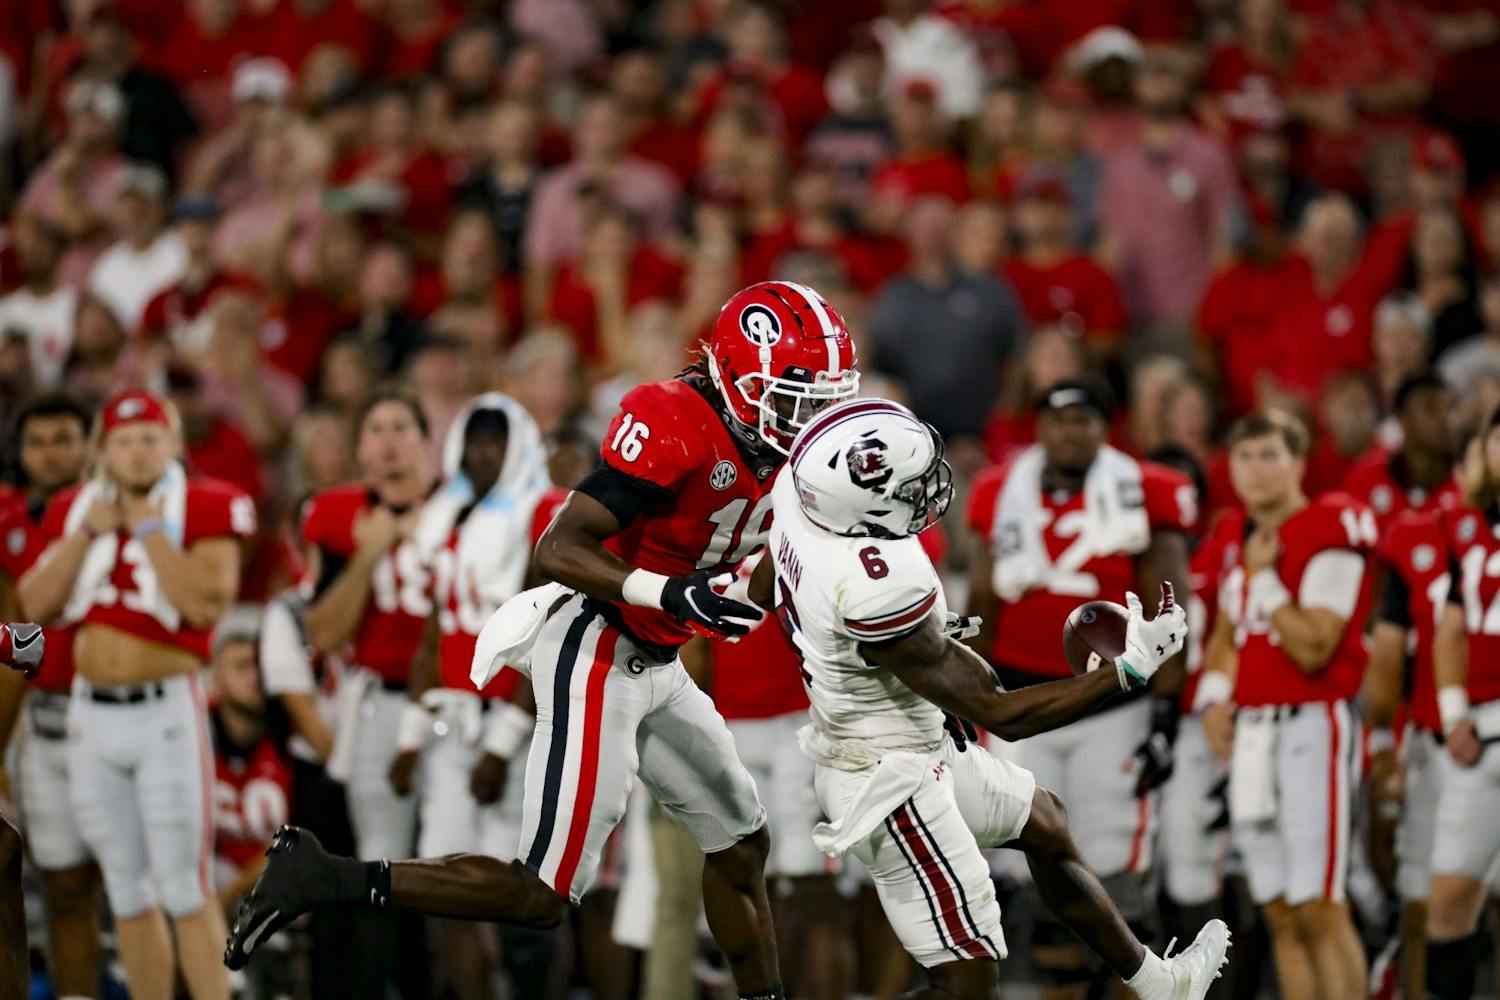 Senior wide receiver Josh Vann catches a pass in South Carolina's game against Georgia on Sept. 18, 2021.